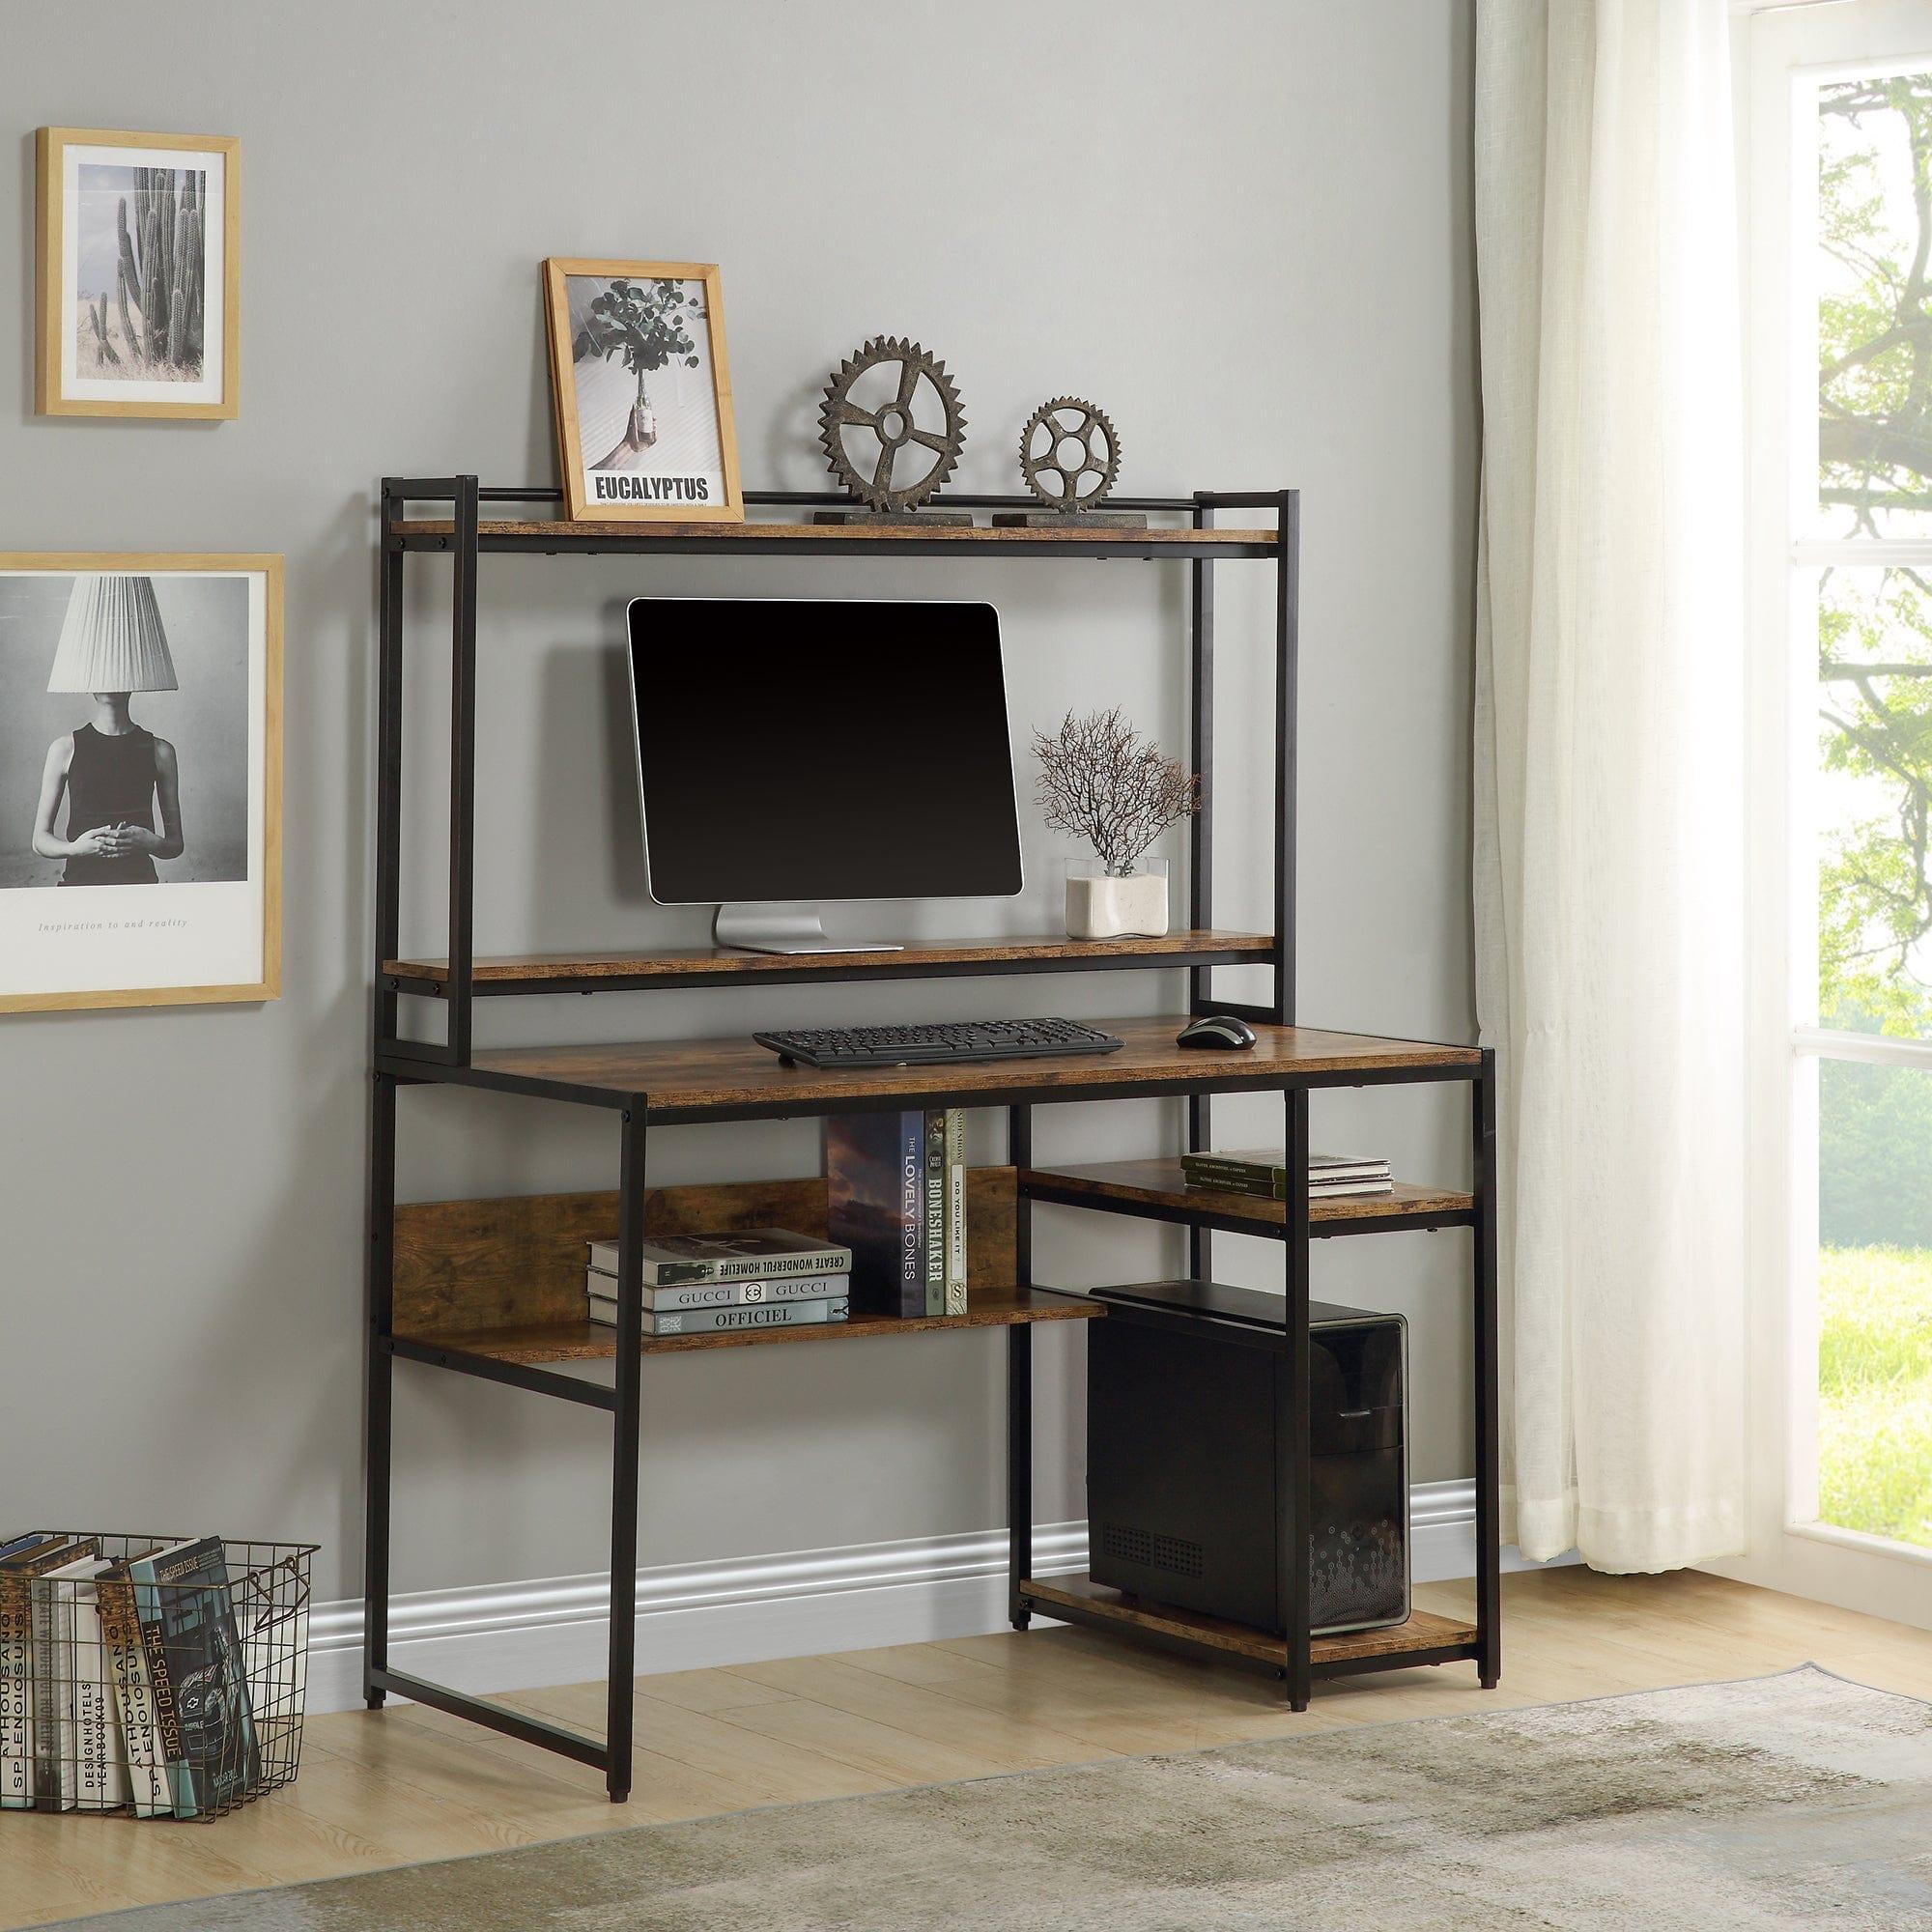 Shop Home Office Computer Desk with 2-Tier Bookshelf and Open Storage Shelf/Equipped with Removable Monitor Riser(Brown) Mademoiselle Home Decor